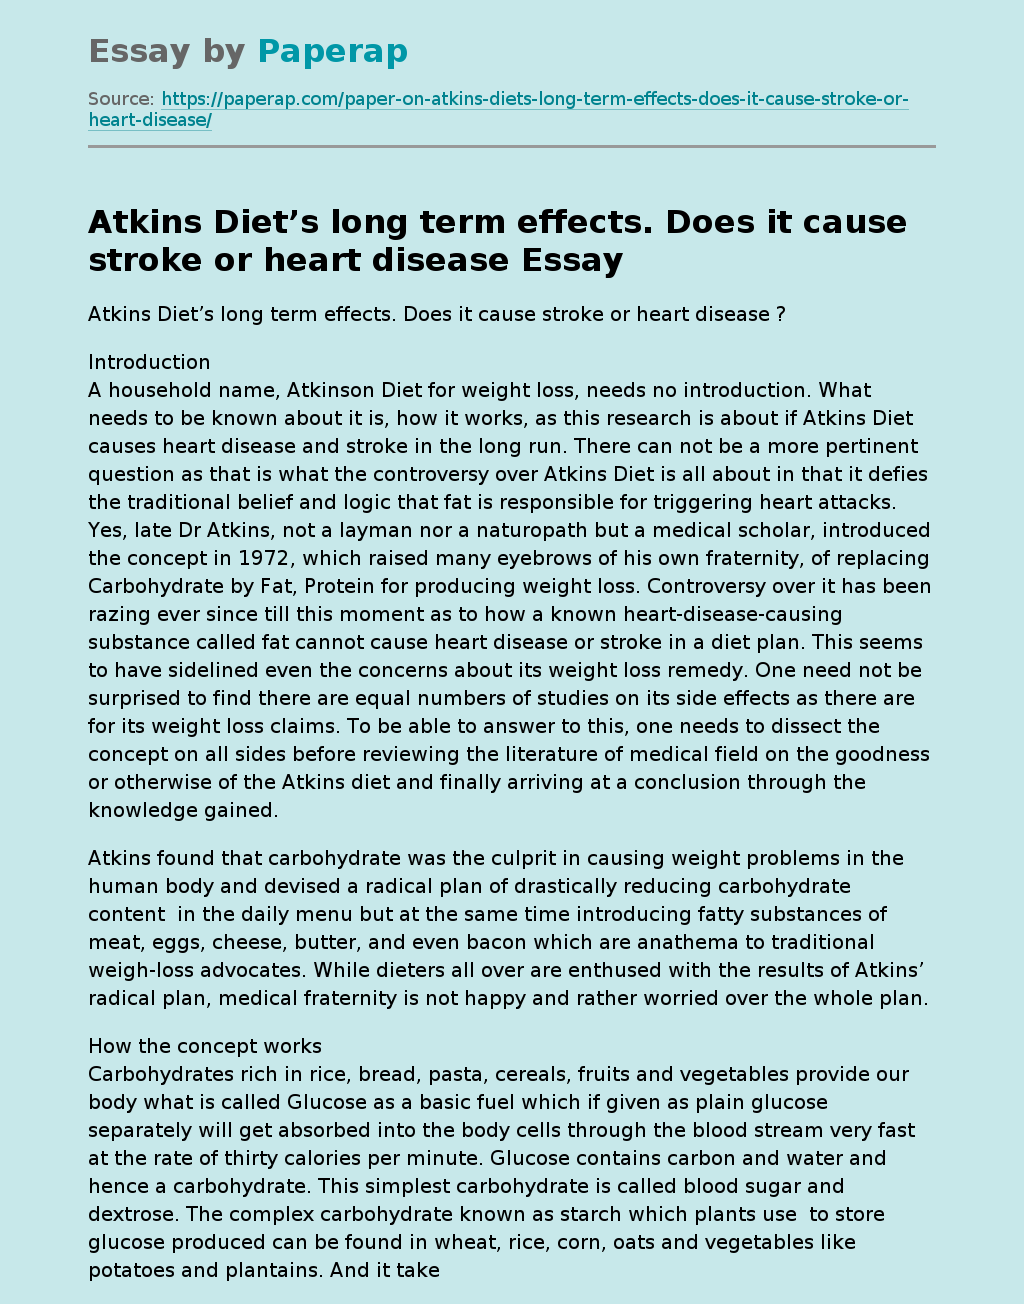 Atkins Diet’s long term effects. Does it cause stroke or heart disease